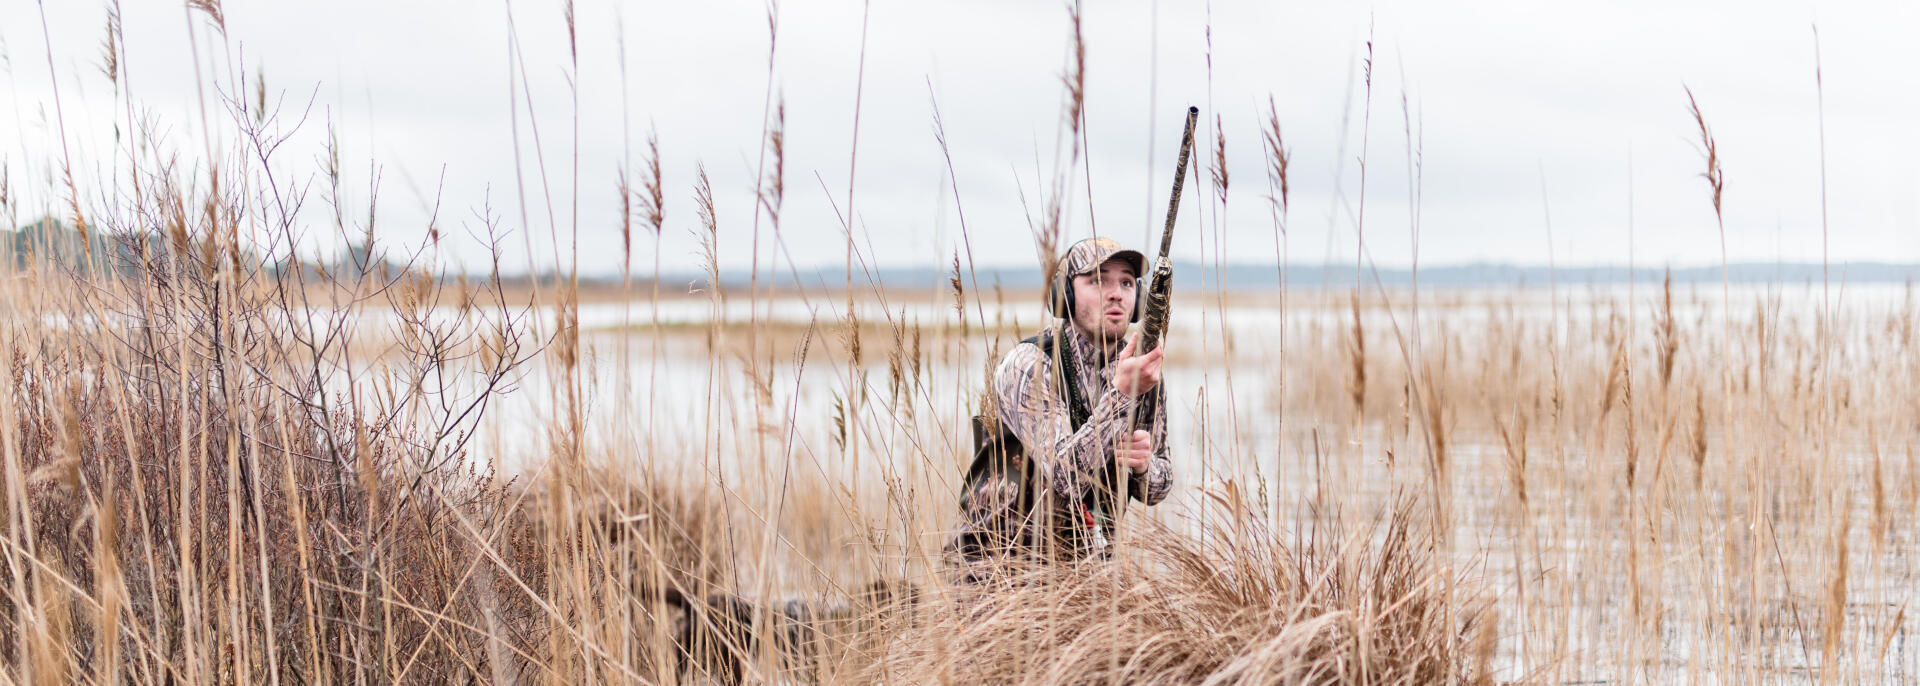 Water fowl hunting: the art of camouflage